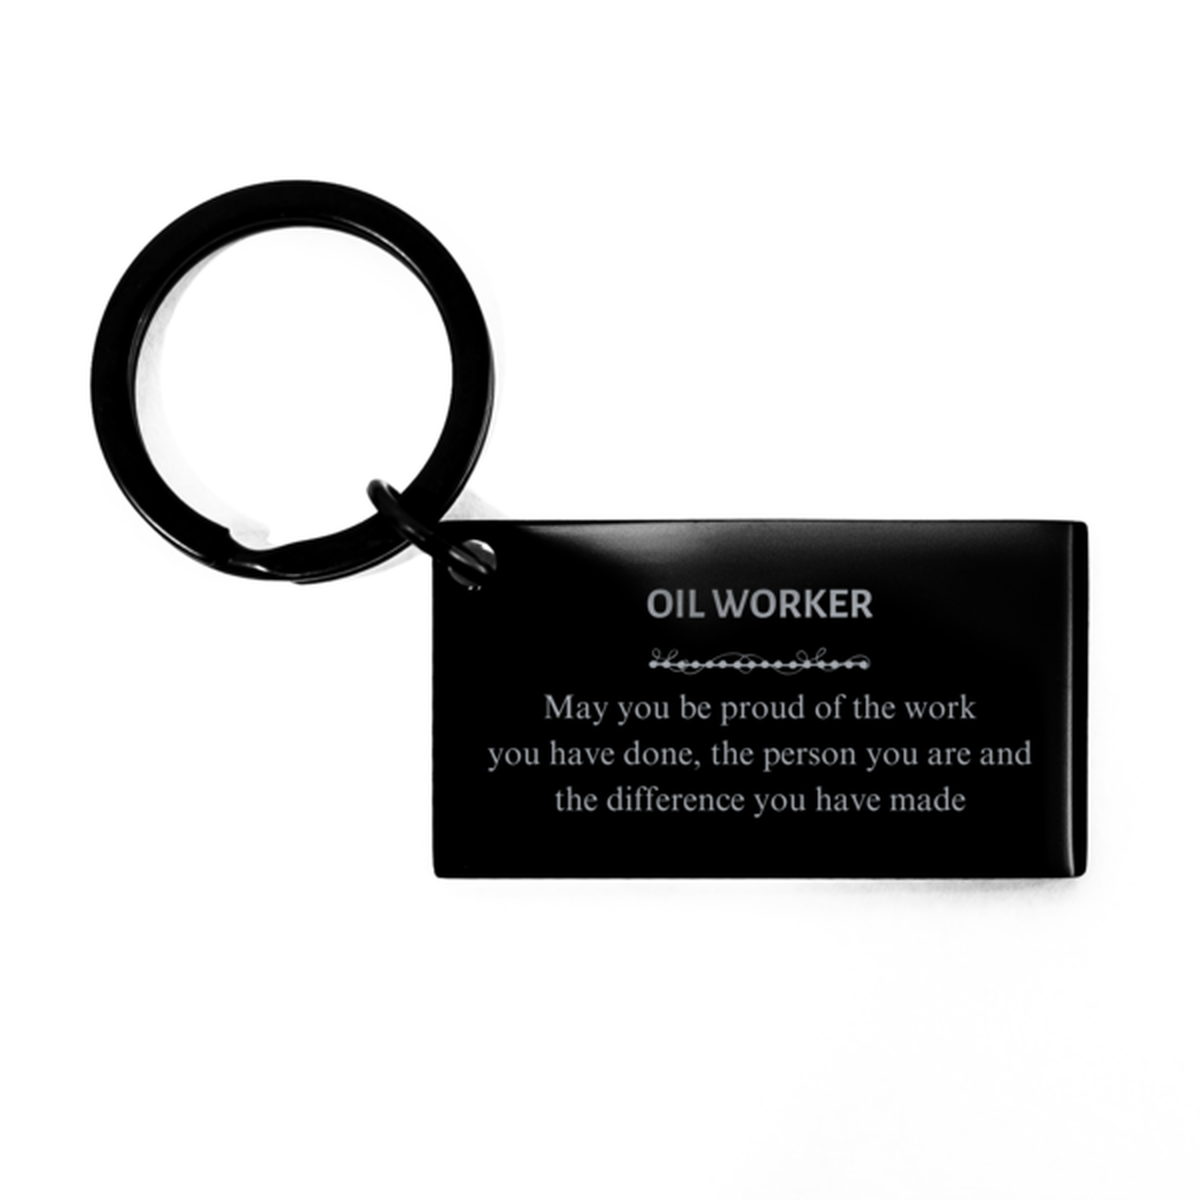 Physician Assistant May you be proud of the work you have done, Retirement Oil Worker Keychain for Colleague Appreciation Gifts Amazing for Oil Worker